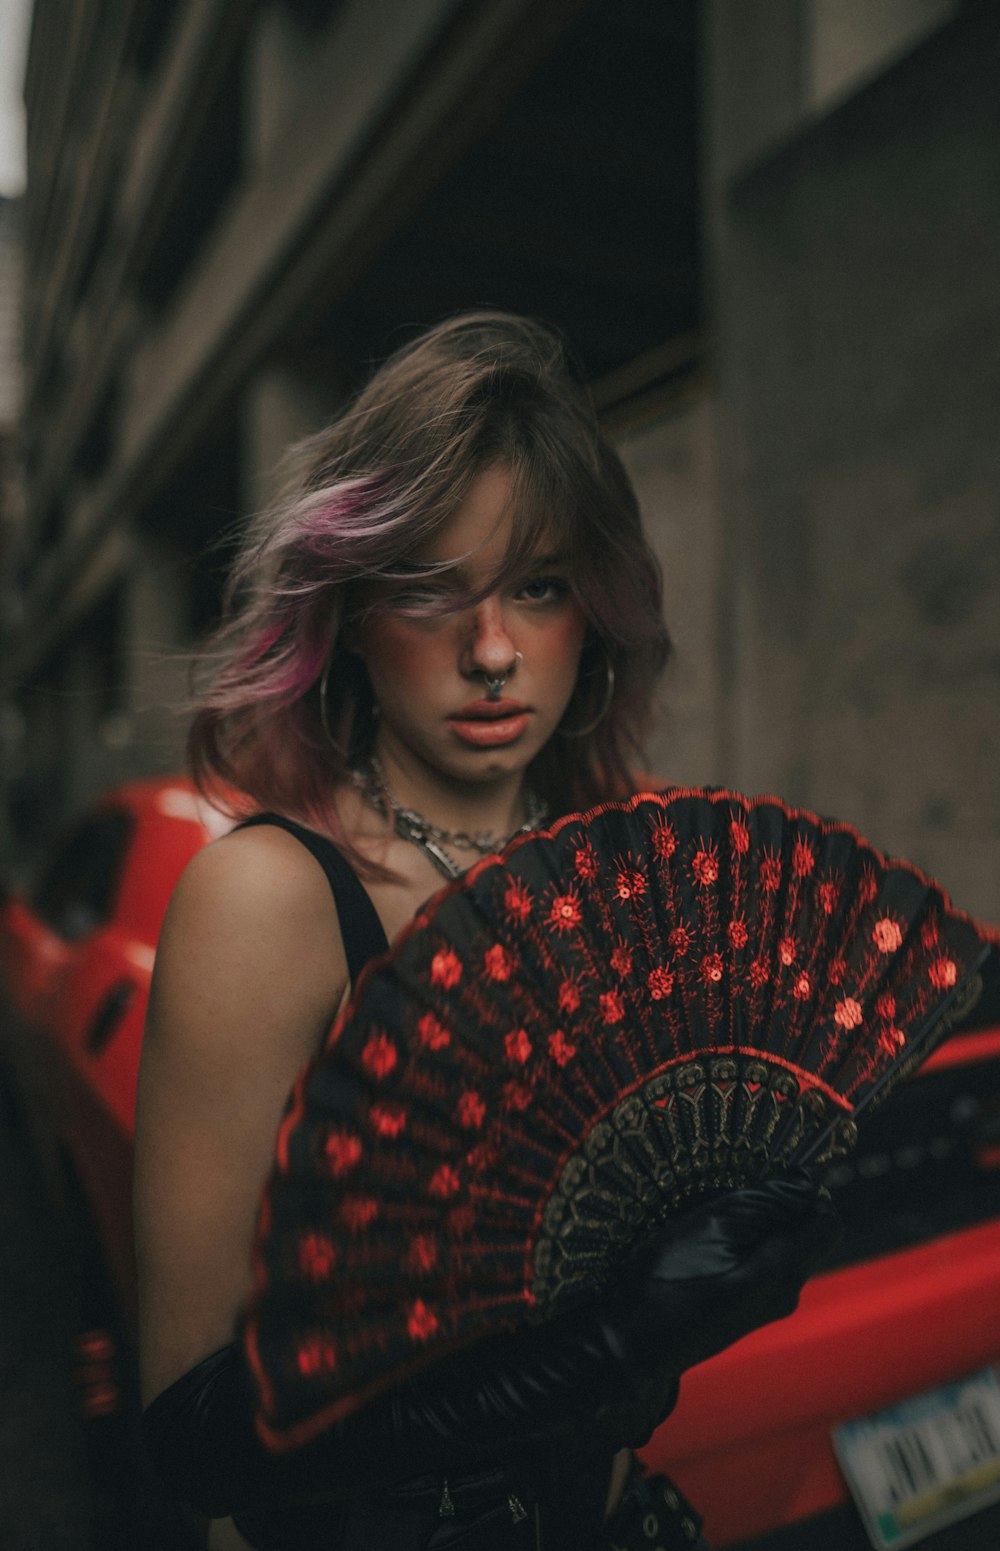 a woman with pink hair holding a red and black fan